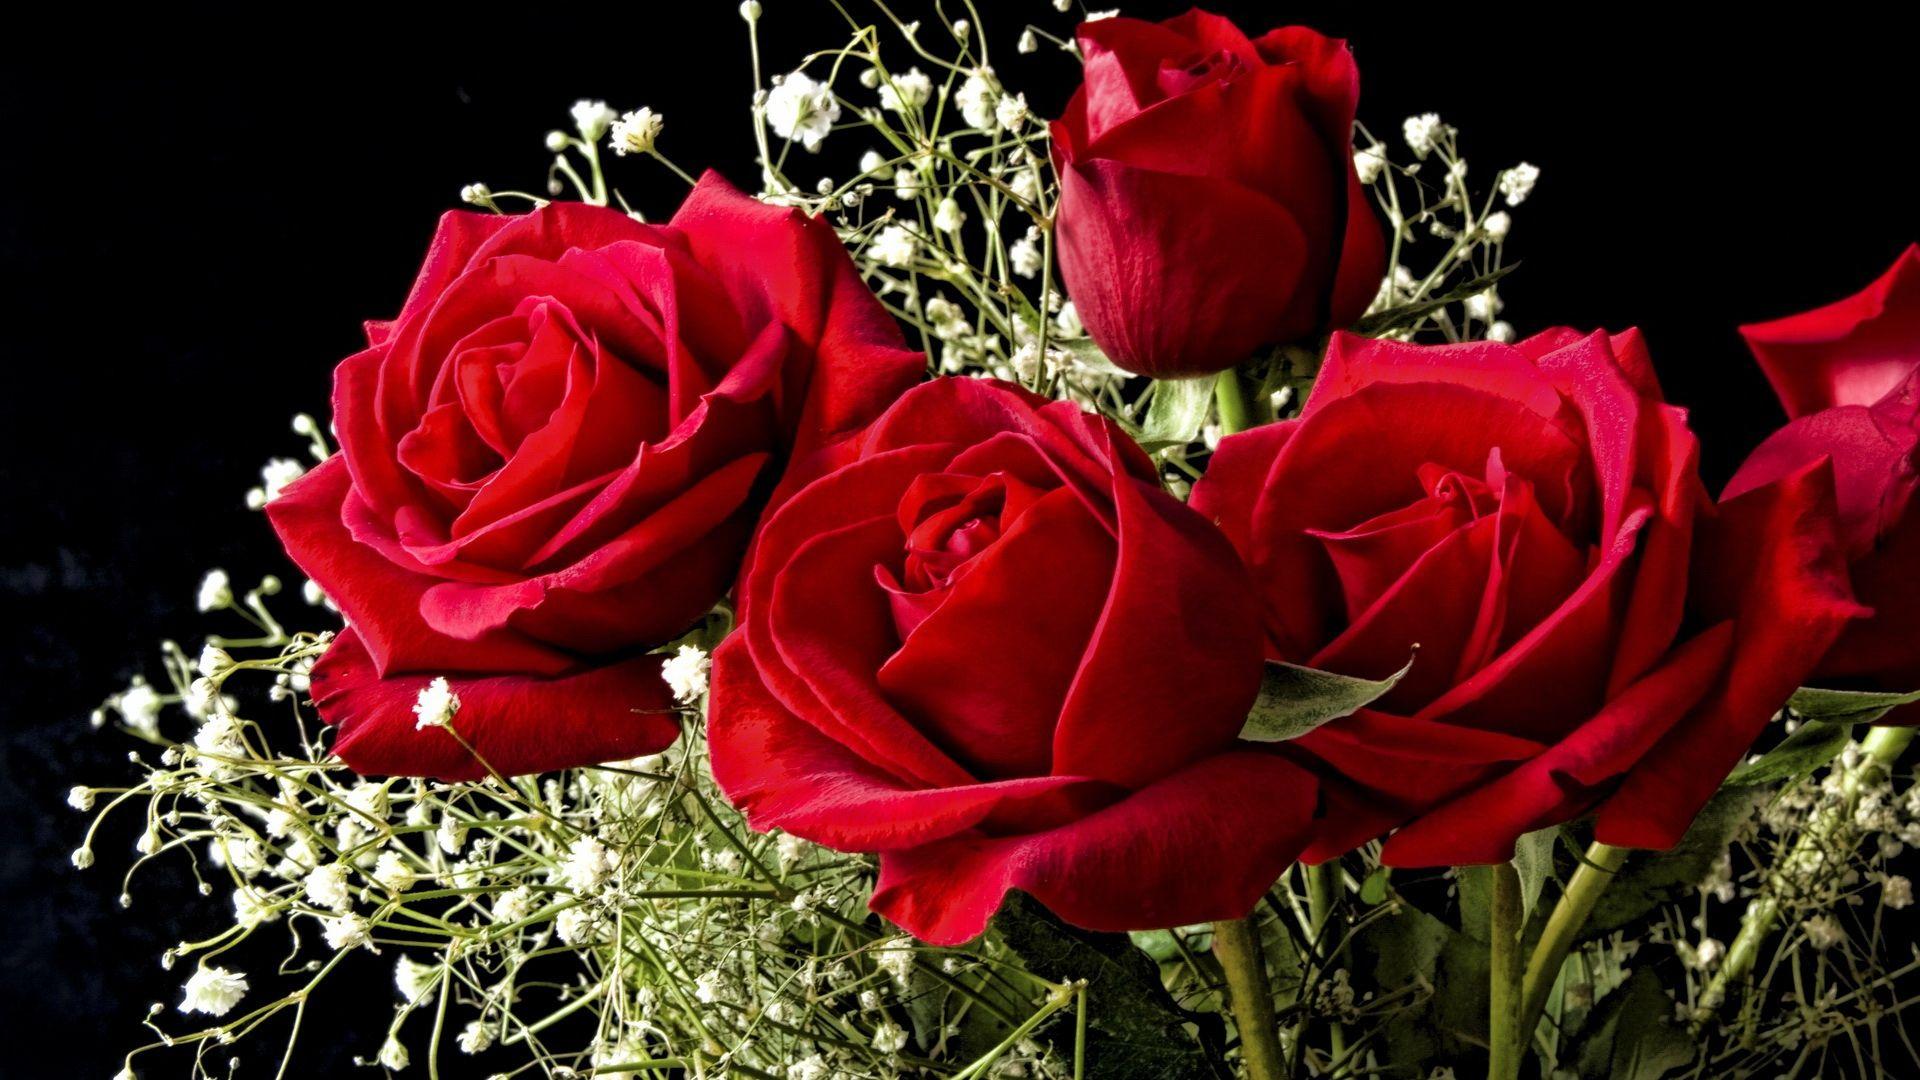 red rose flower photo in dark surface iPhone 12 Wallpapers Free Download